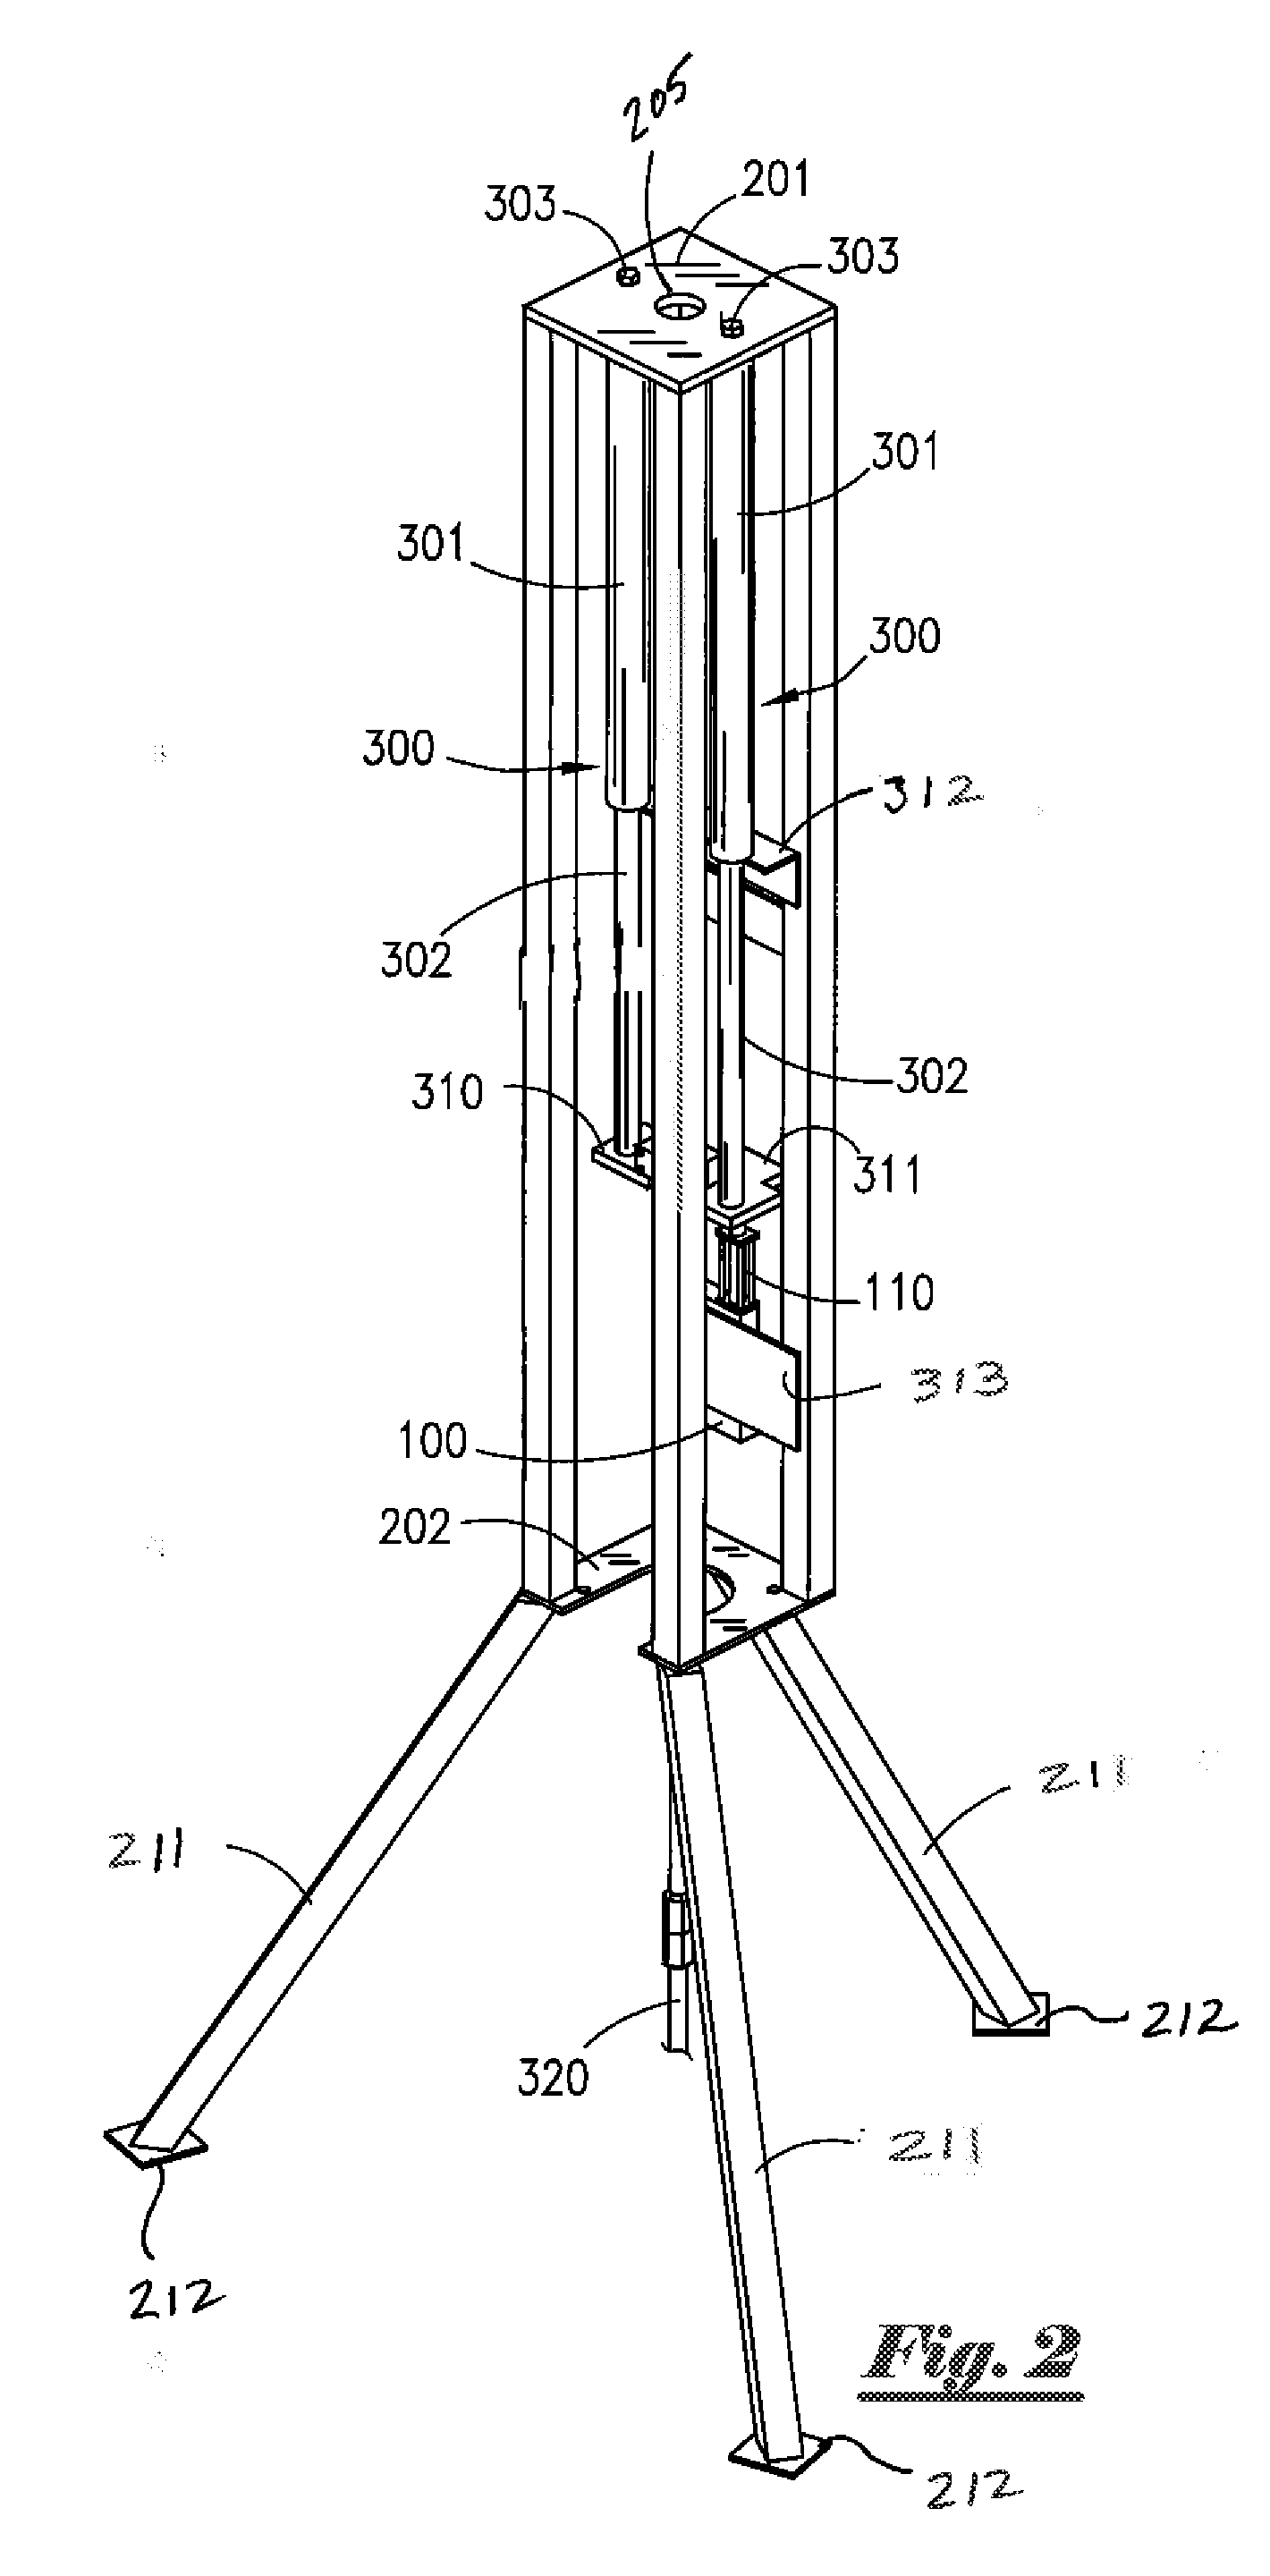 Method and Apparatus for Fluid Pumping